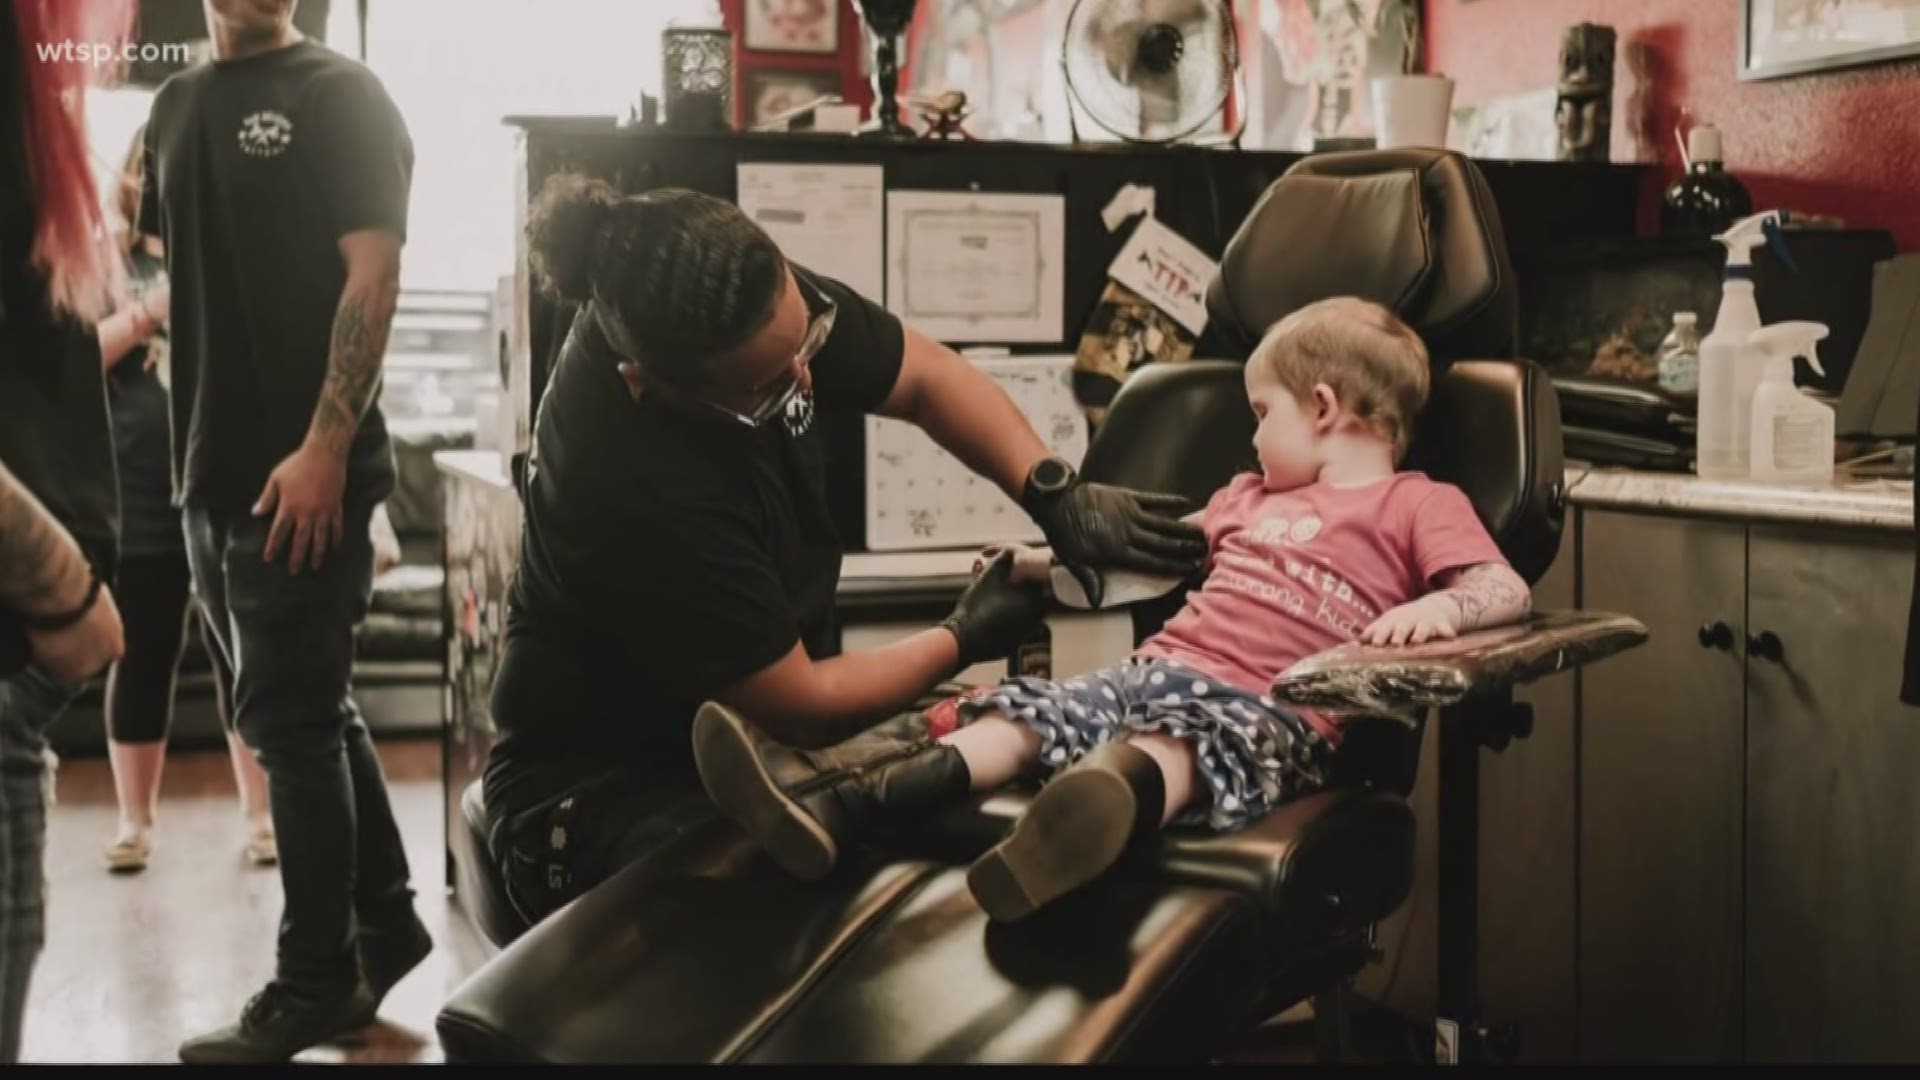 It’s not very often a 3-year-old finds themselves in a tattoo parlor chair.

But Trinity is no ordinary 3-year-old. She’s battling Neuroblastoma cancer, has Horner's syndrome and Harliquine syndrome, according to a GoFundMe Page set up for her.